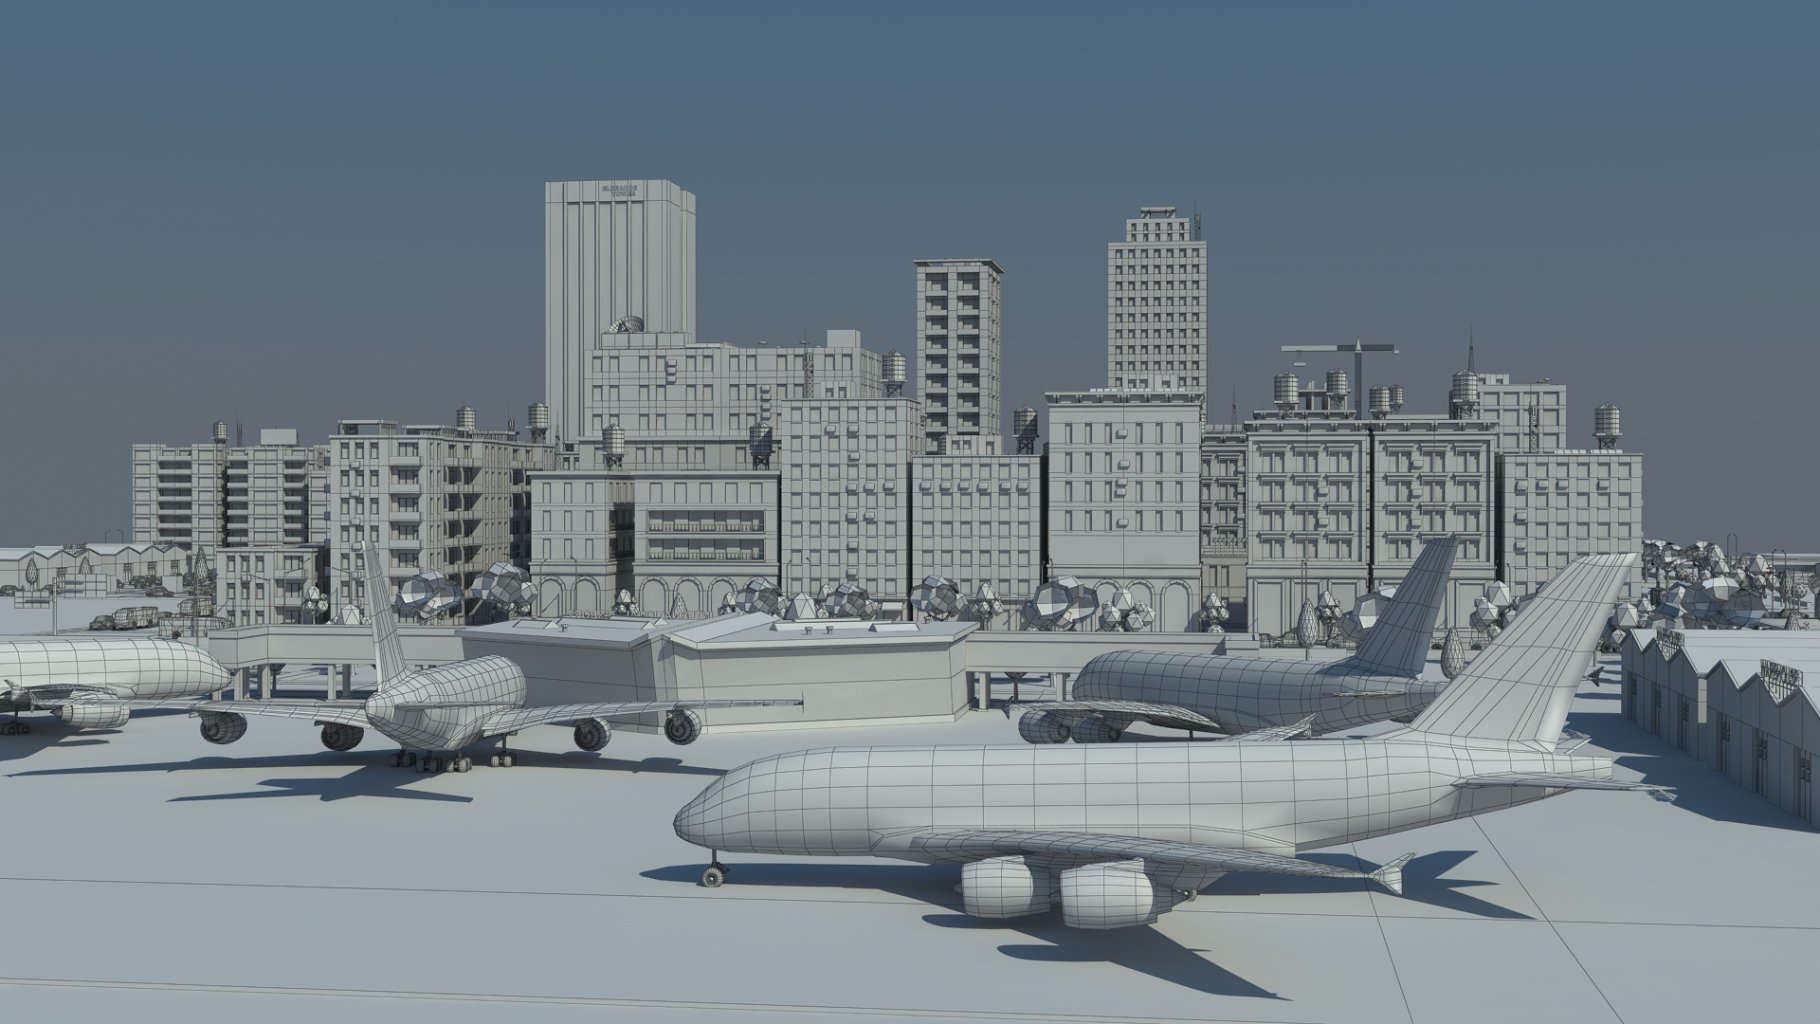 Templates with city and airplanes.